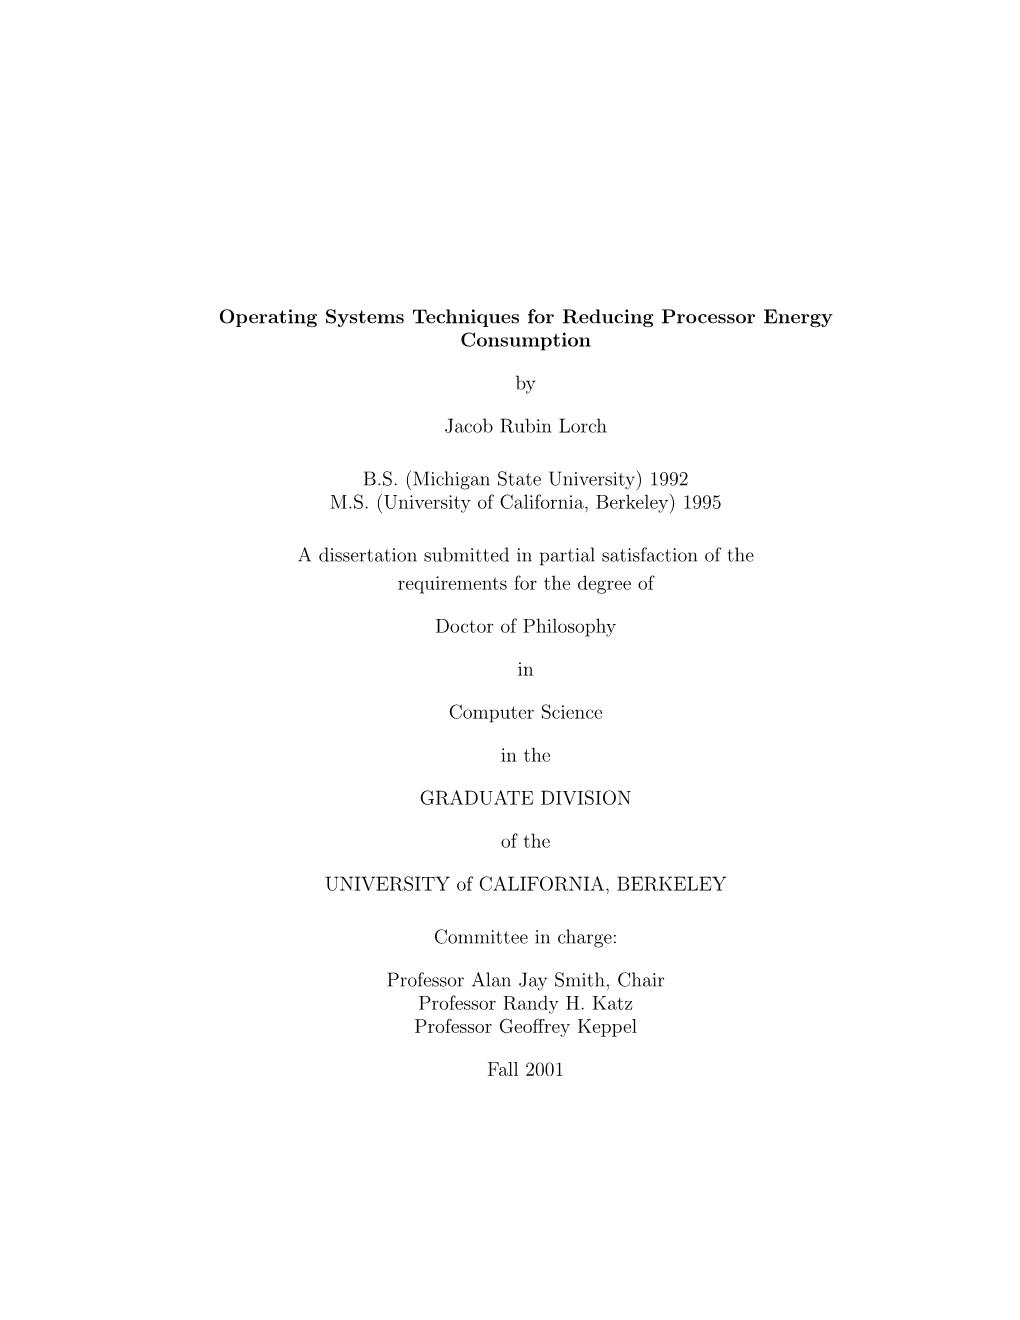 Operating Systems Techniques for Reducing Processor Energy Consumption